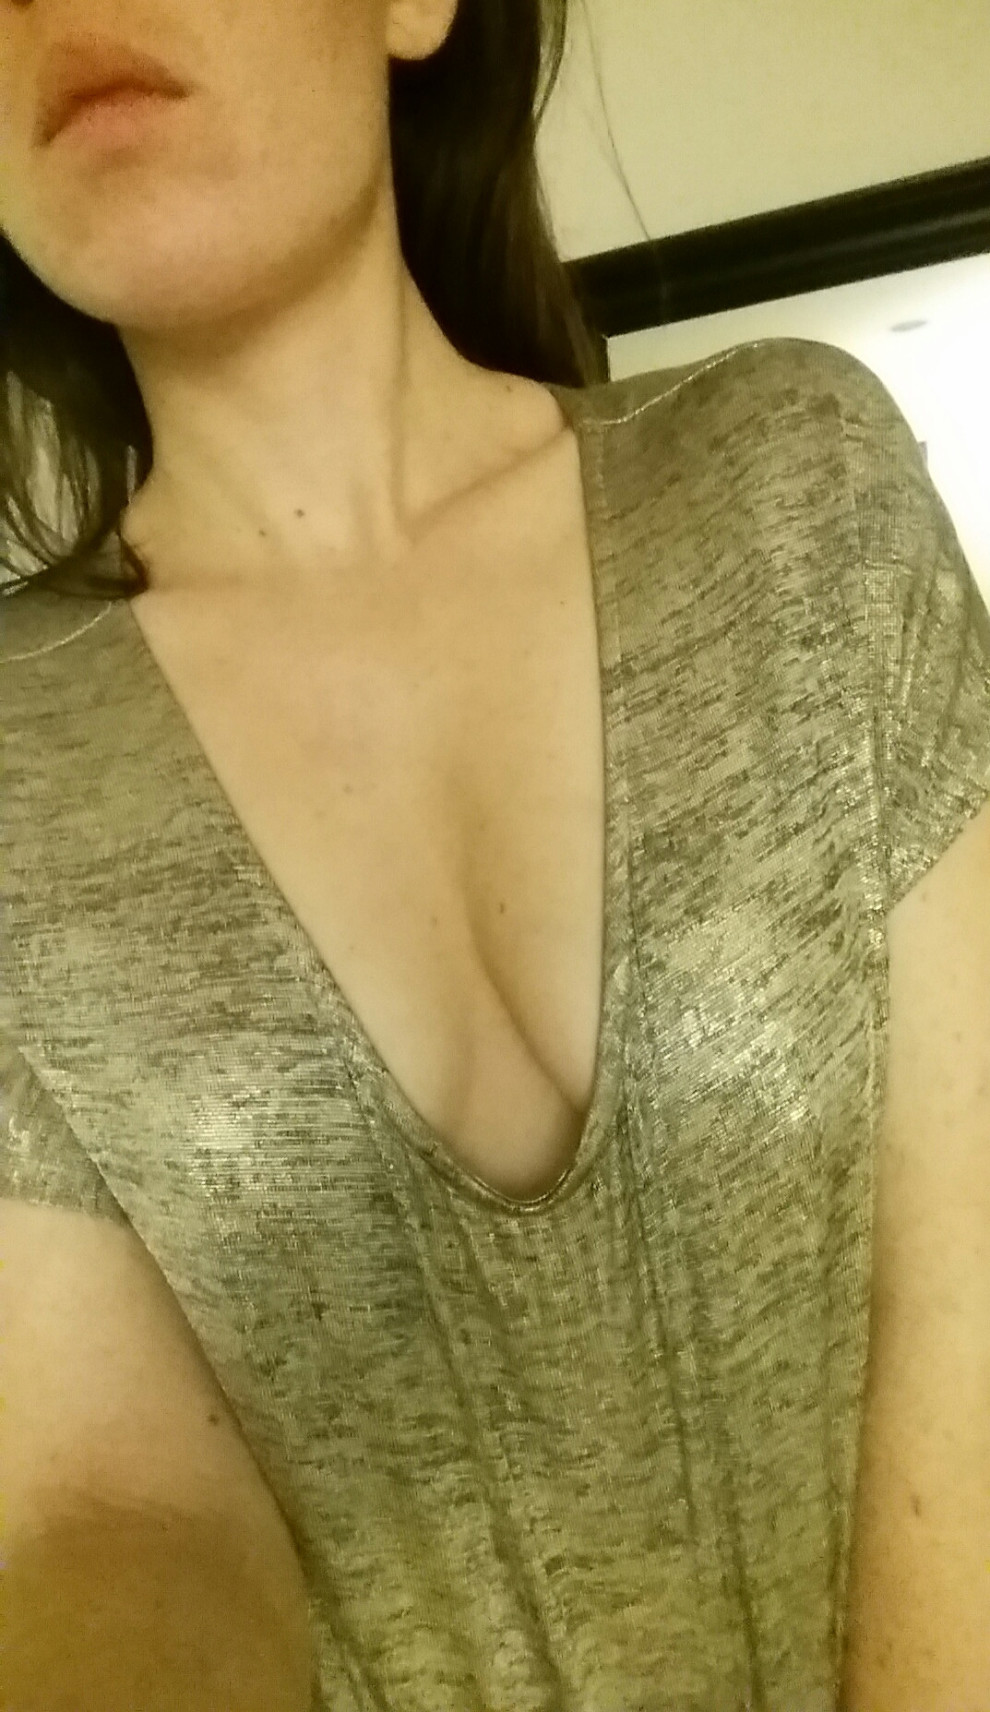 [F]an wanted me in metallics